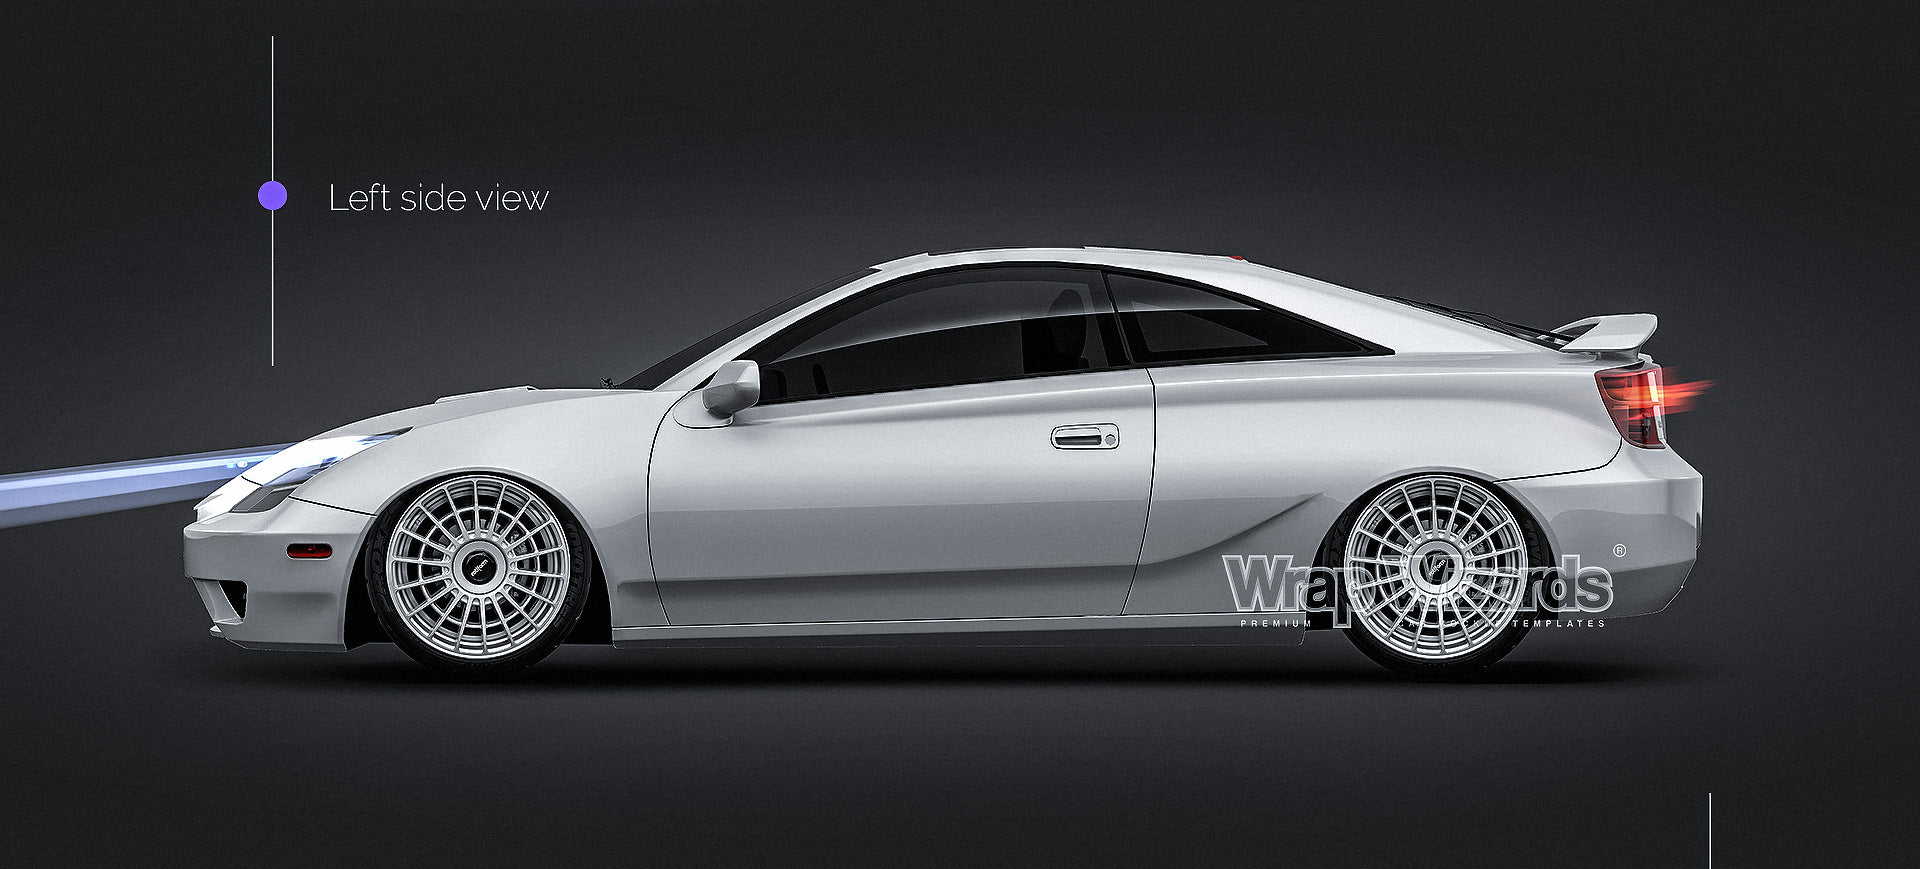 Toyota Celica 2003 glossy finish - all sides Car Mockup Template.psd